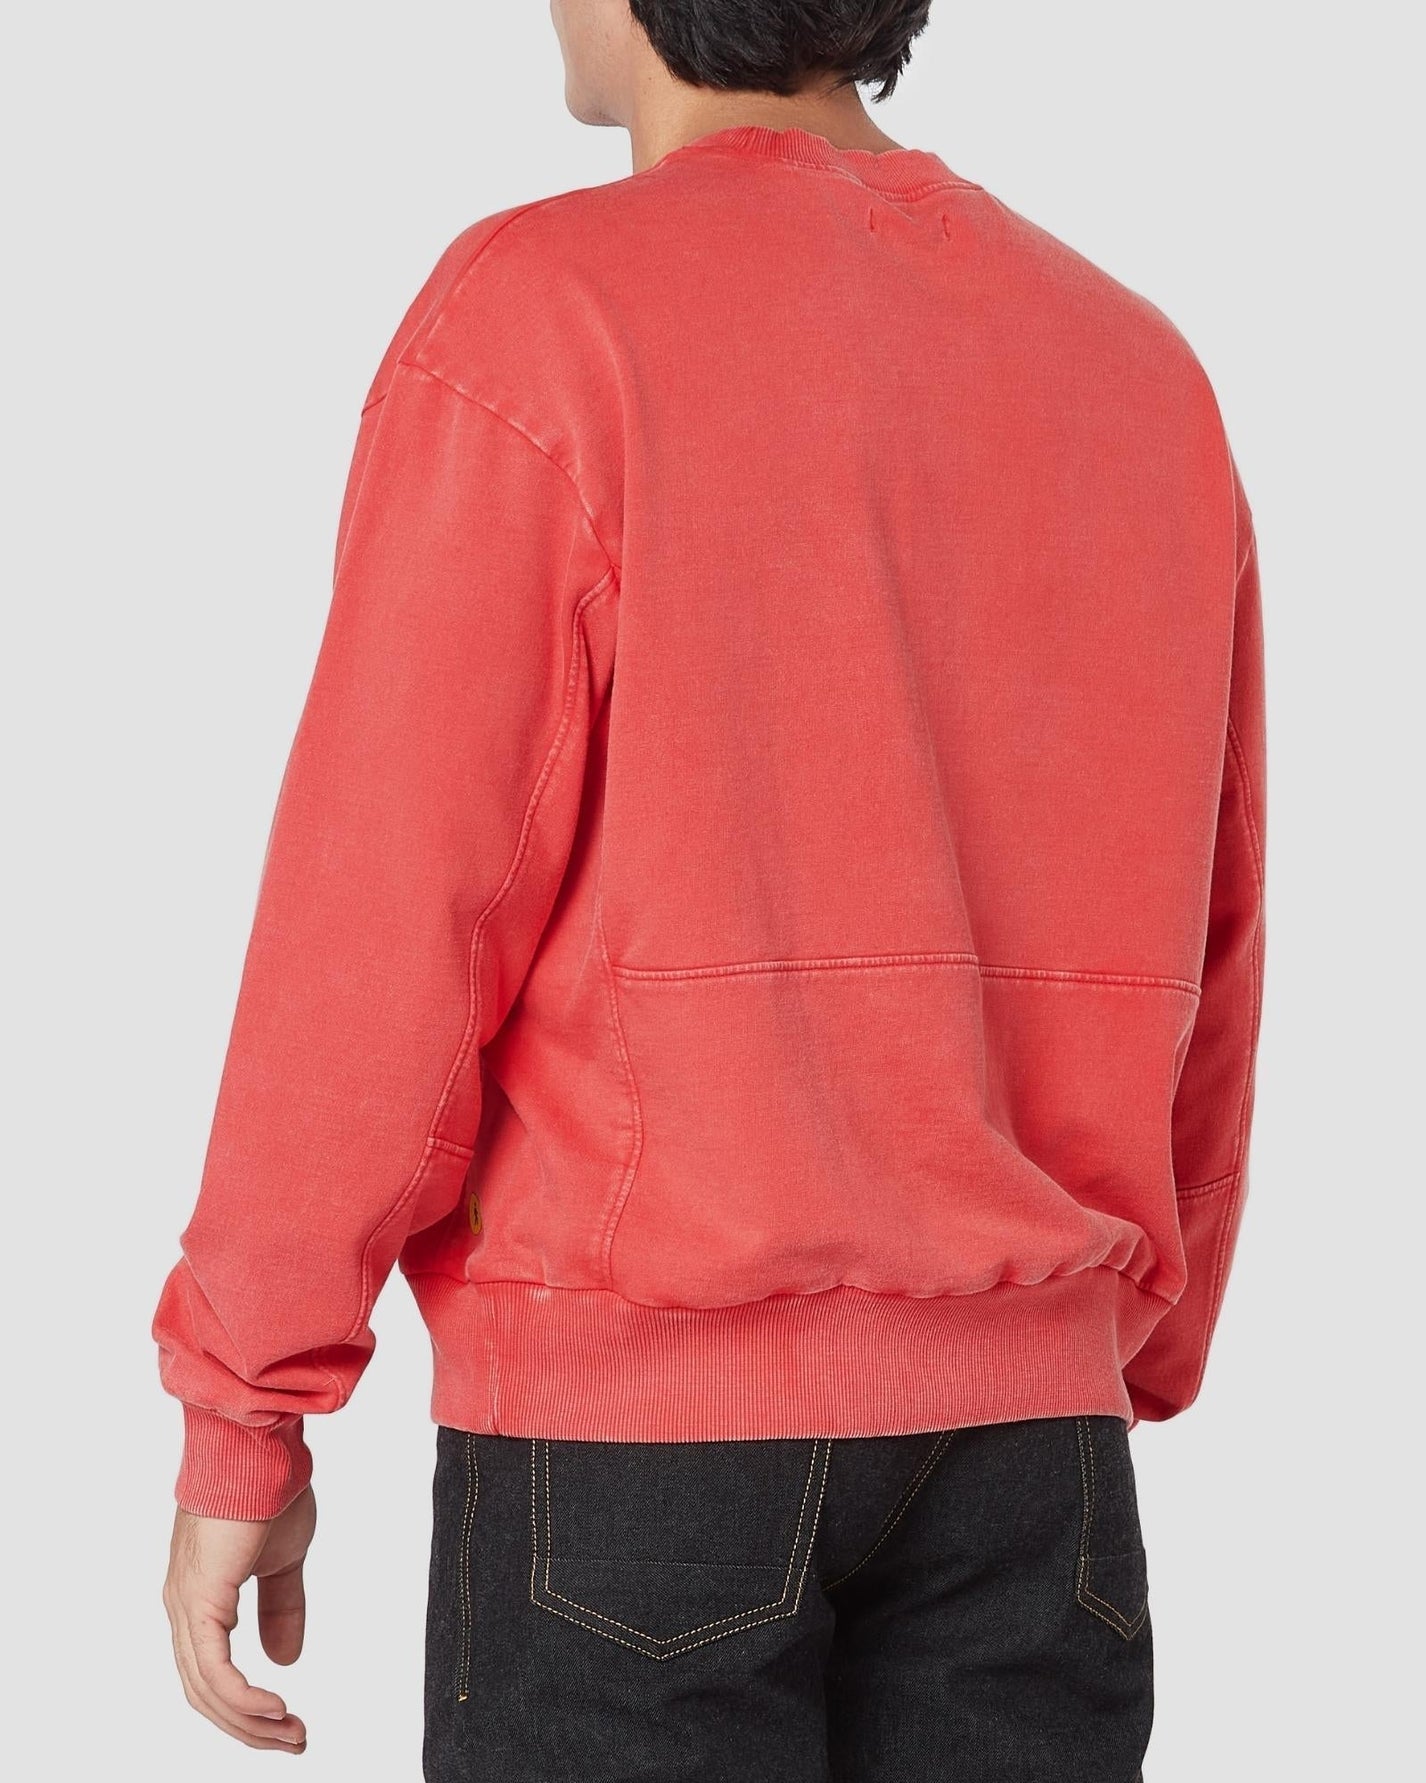 Distressed Panelled Sweats - Red